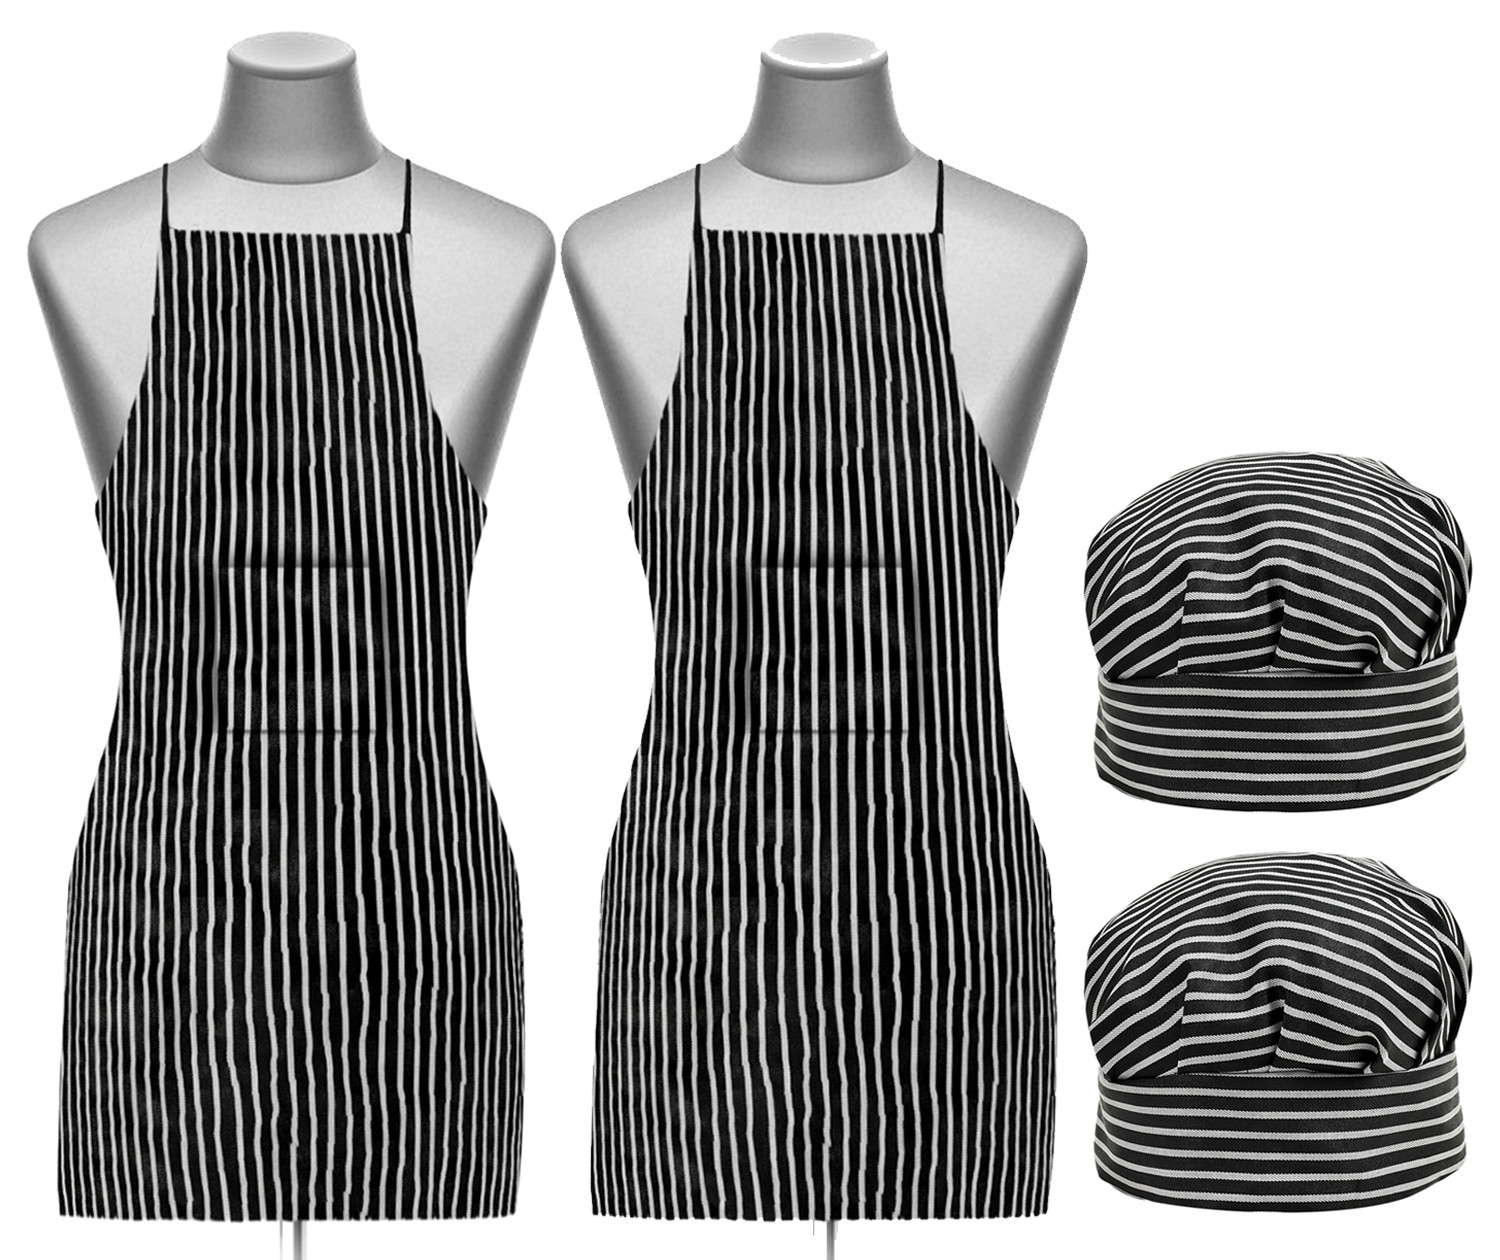 Kuber Industries Linning Printed Apron & Cooking Cap Set For Cooking, Baking, Party Favors, Home Kitchen, Restaurant,(Black & White)